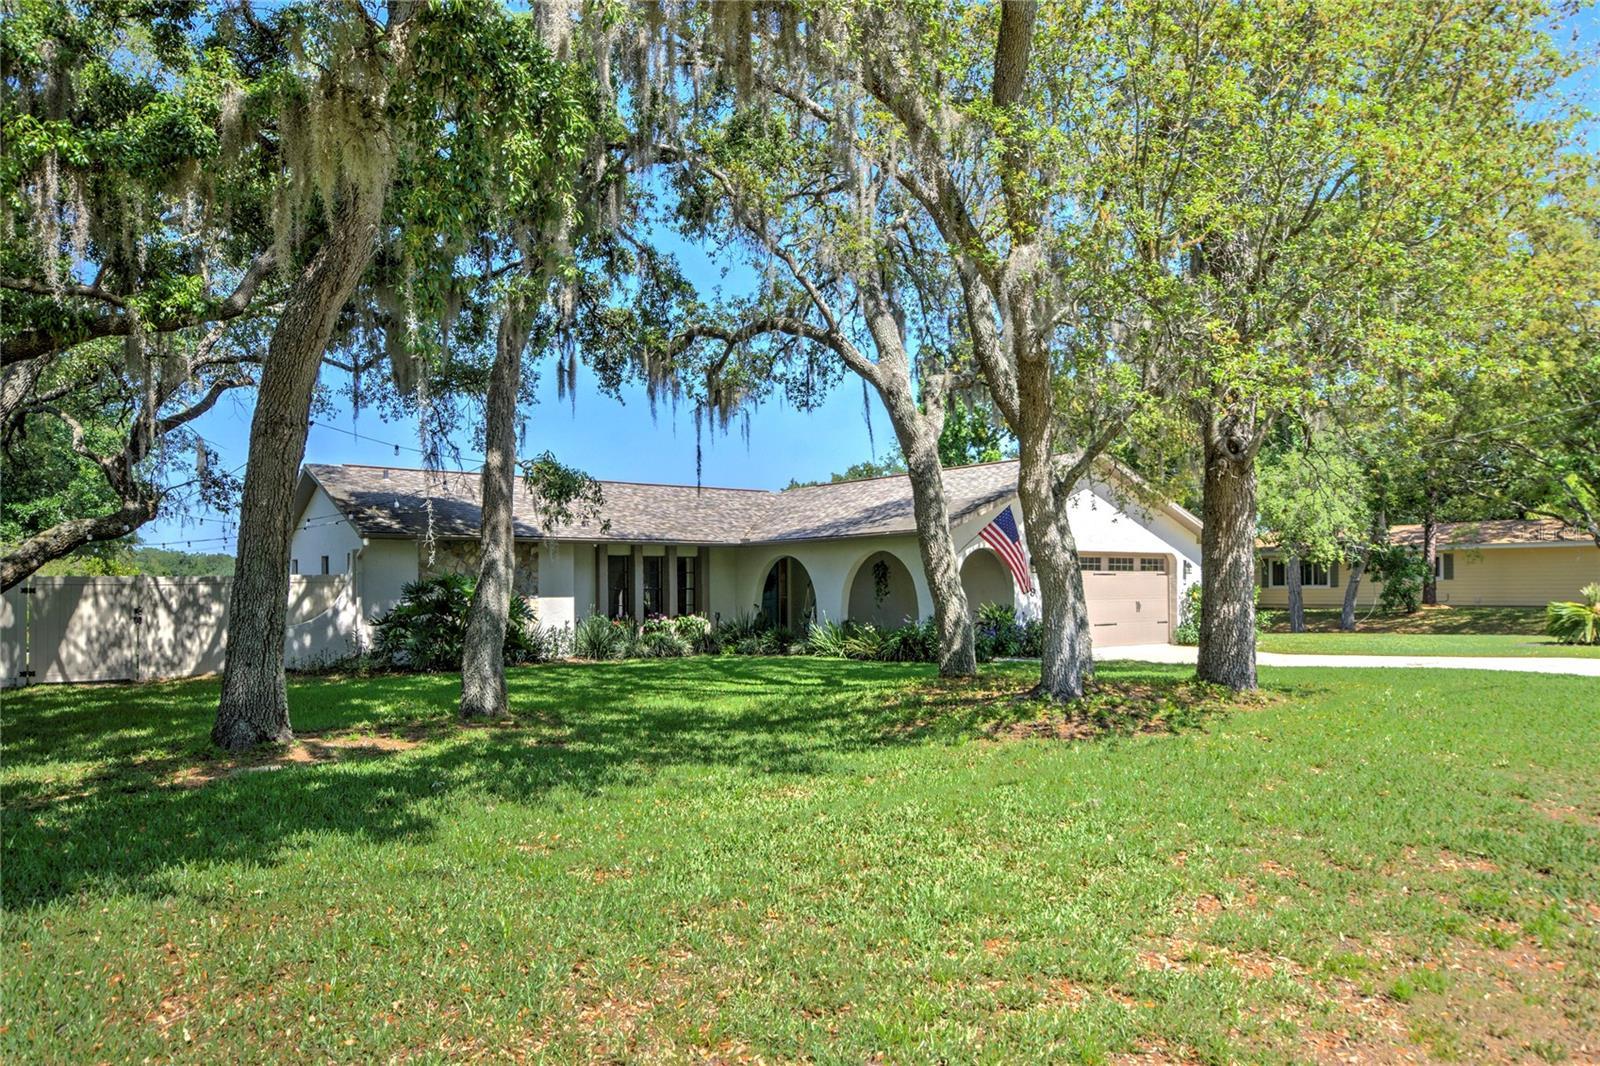 Photo one of 479 Fairbanks Rd Spring Hill FL 34608 | MLS W7864084